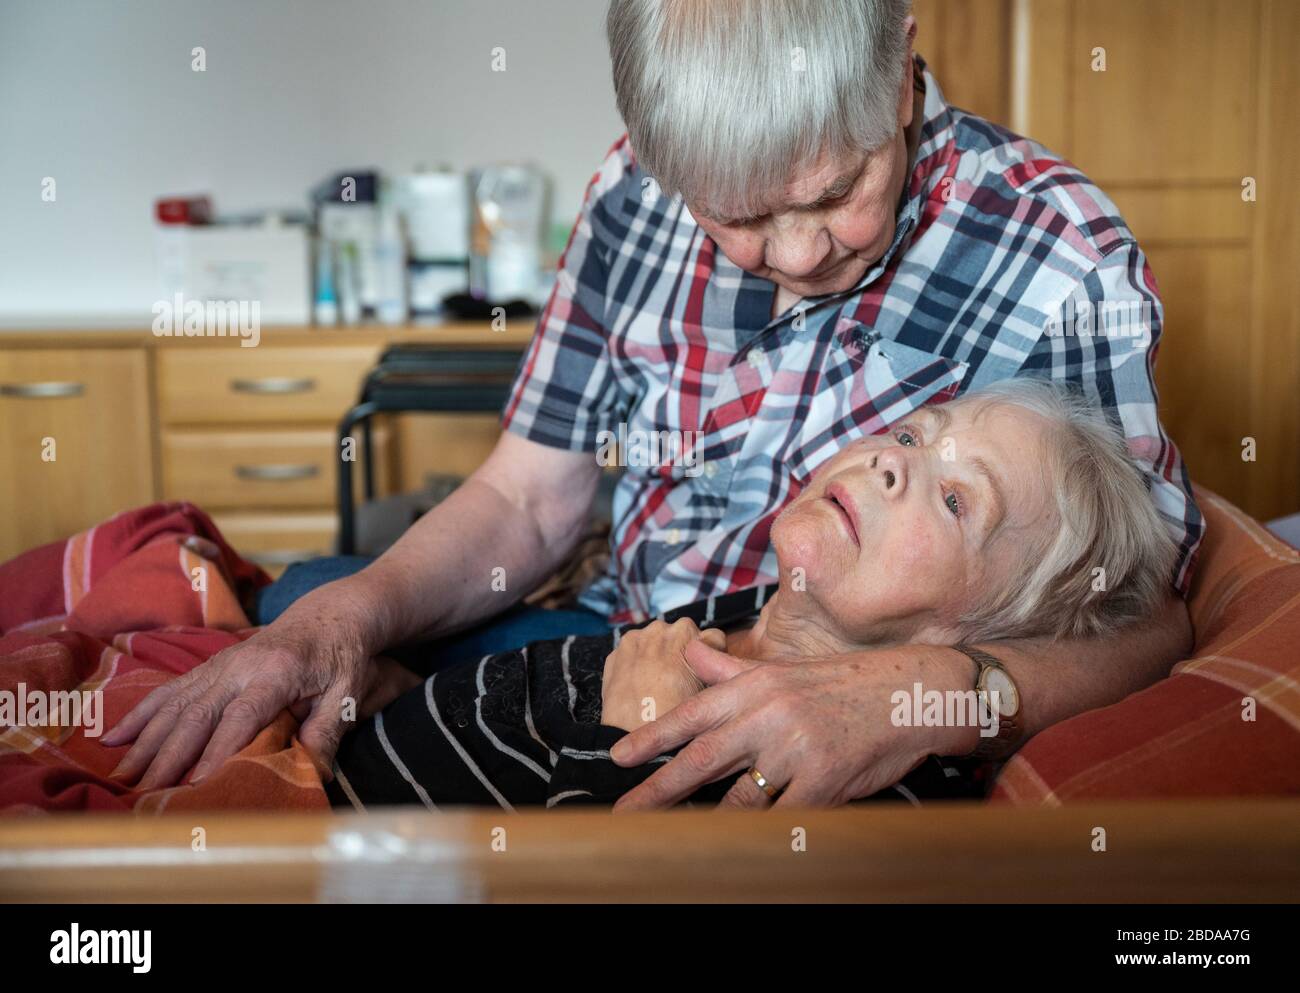 06 April 2020, North Rhine-Westphalia, Lünen: In his apartment, a caring  husband takes his wife, who is suffering from dementia and Parkinson's  disease, into his arms. In the midst of the Corona